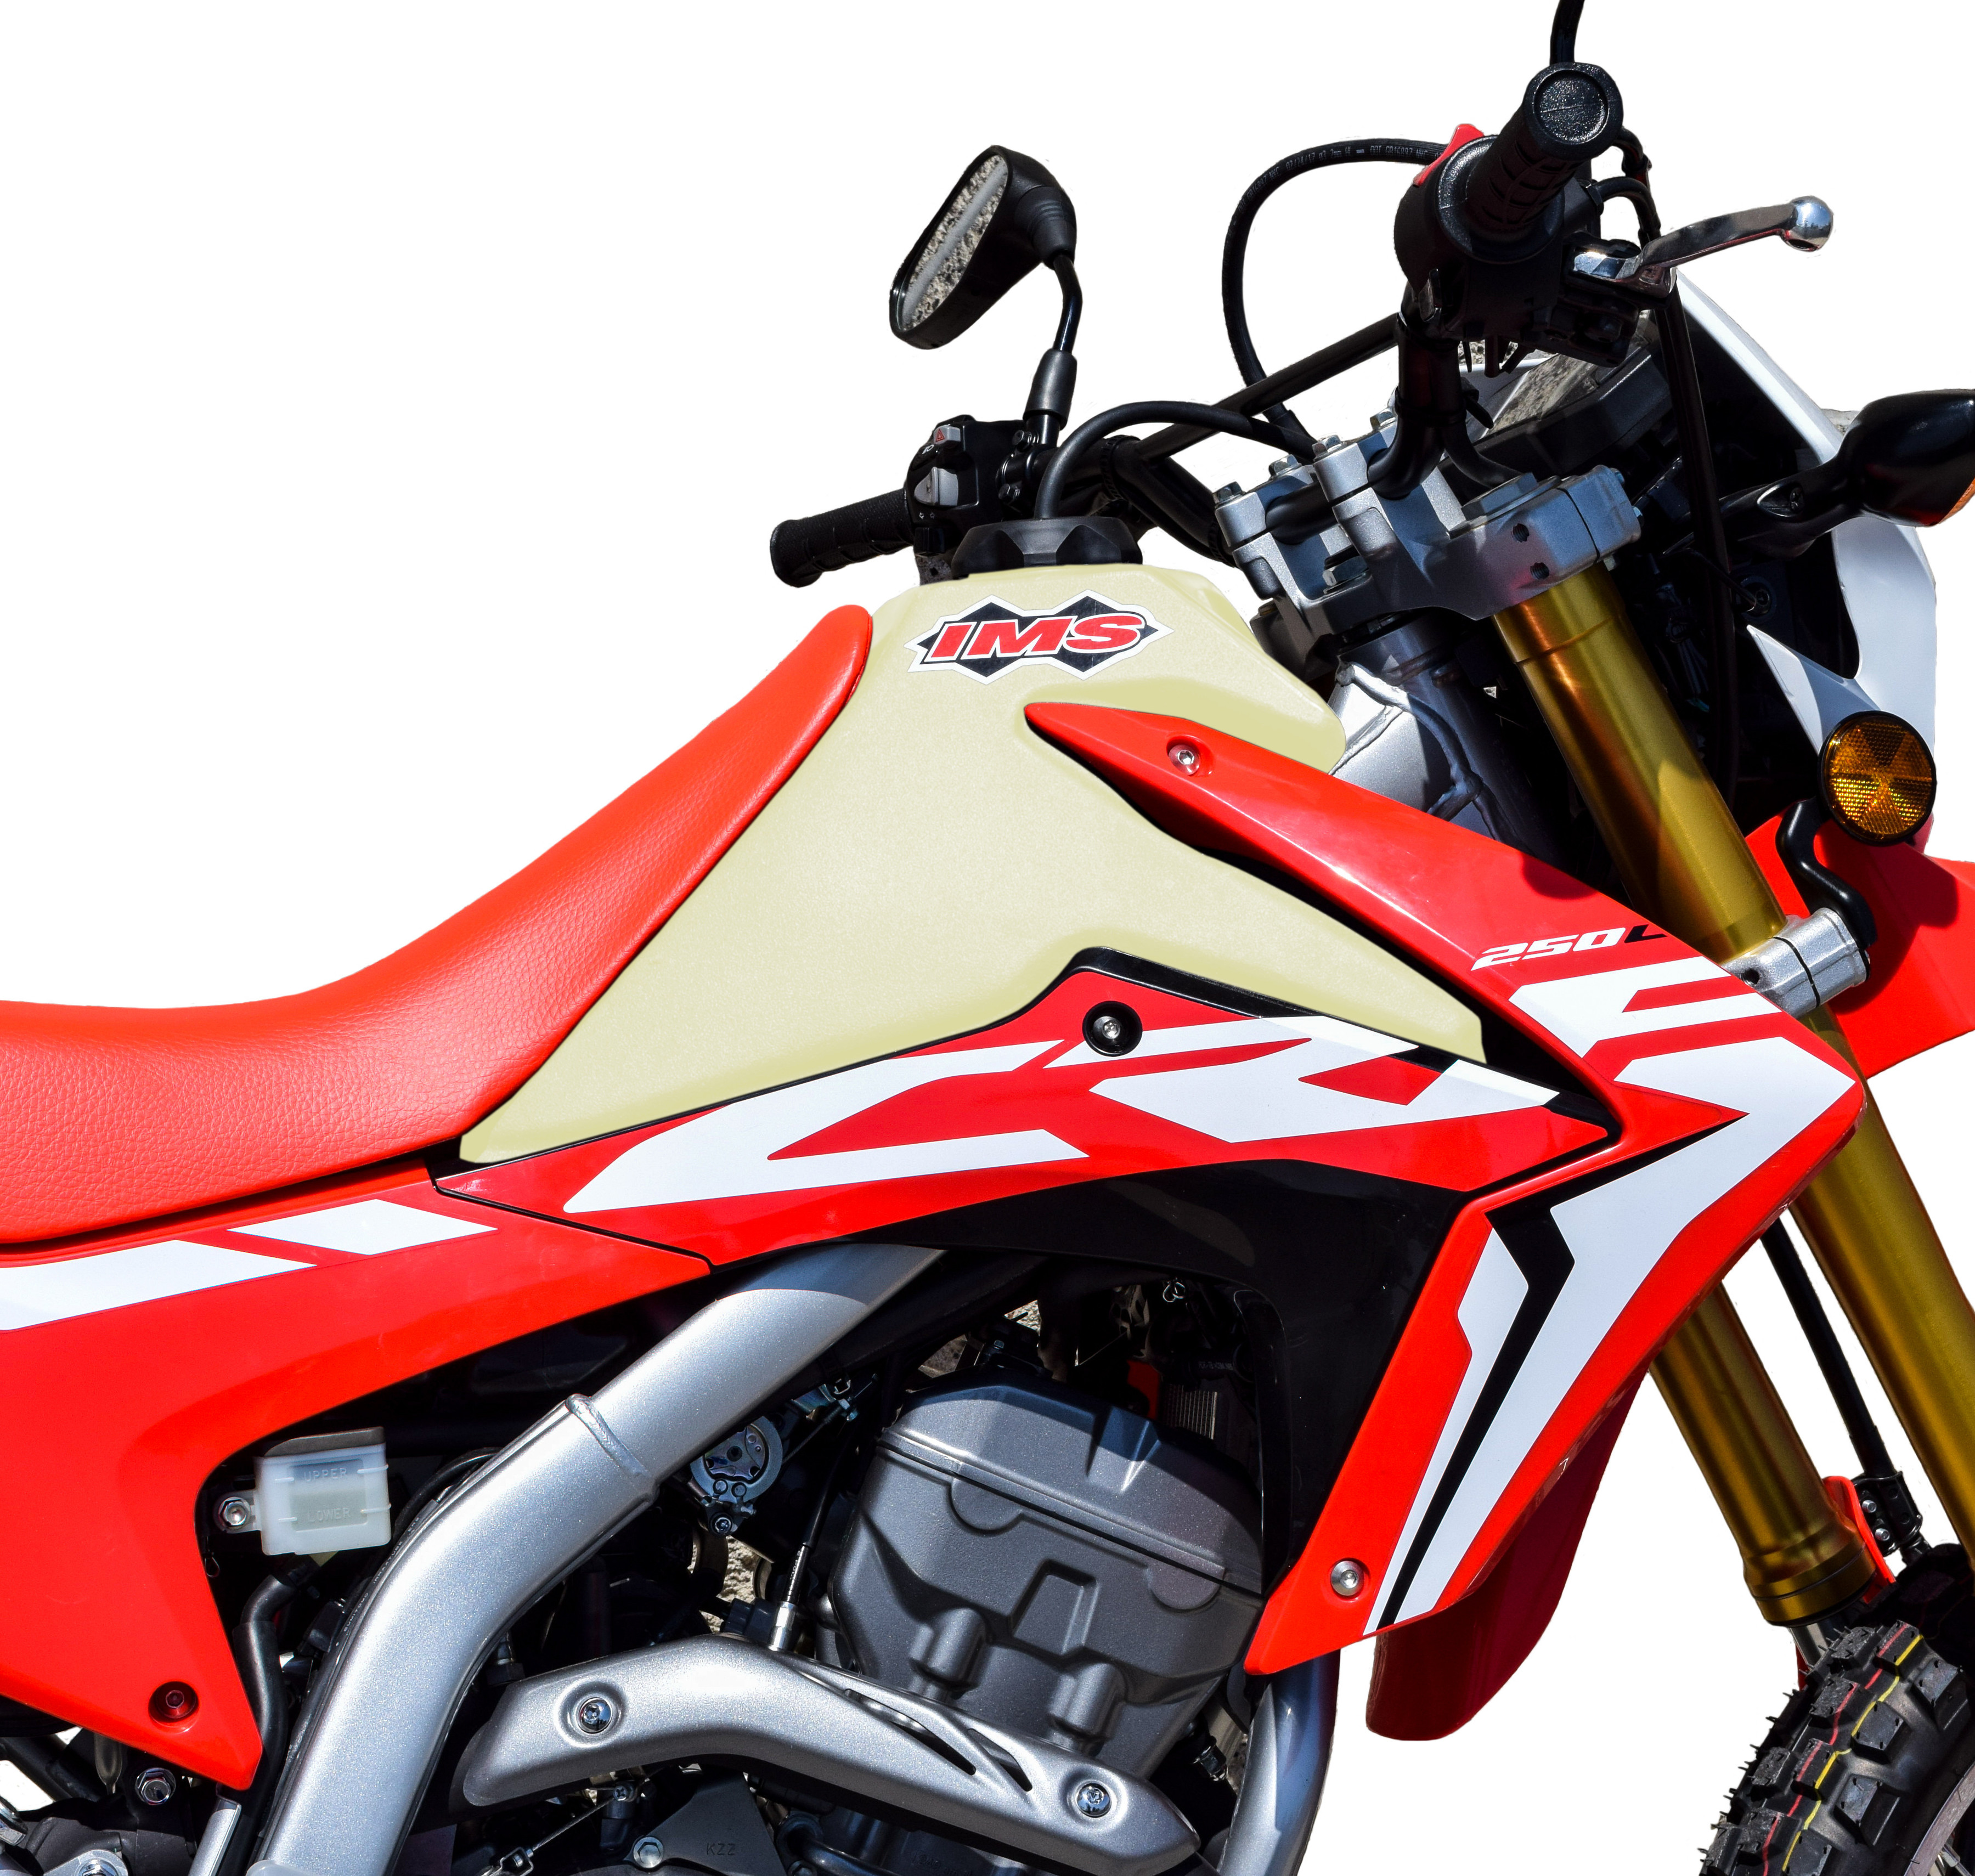 Large Capacity Fuel Tank 3.5 Gallon Natural - For 17-19 CRF250L - Click Image to Close